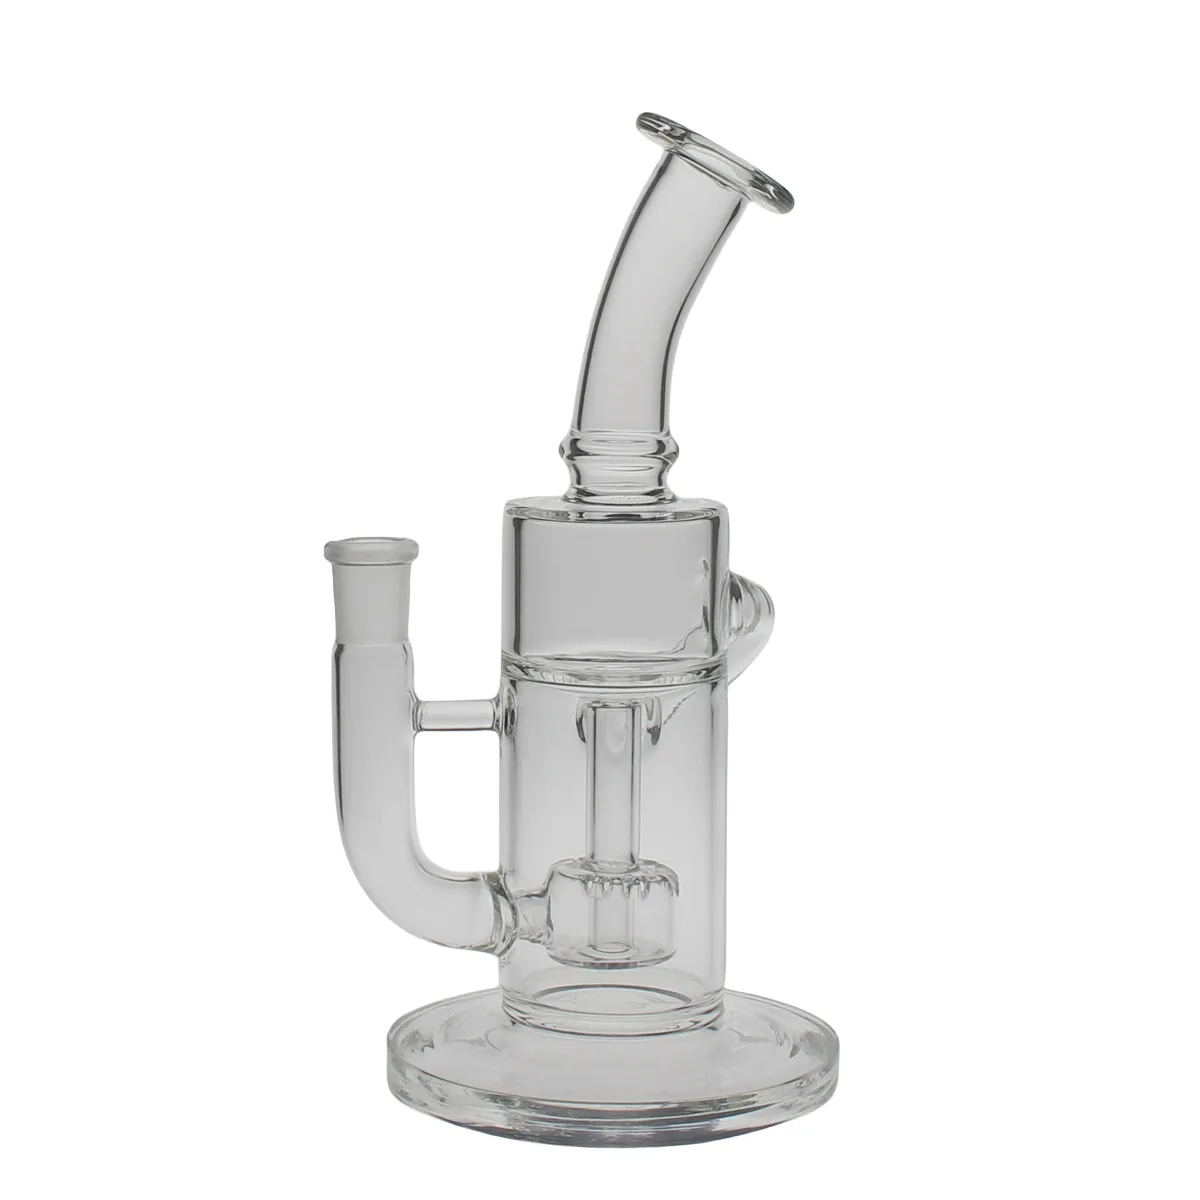 SAML Klein Bong Hookahs Dab Rig Glass Recycler Smoking Flower Water Pipe Clear joint Size 14.4mm FC-198